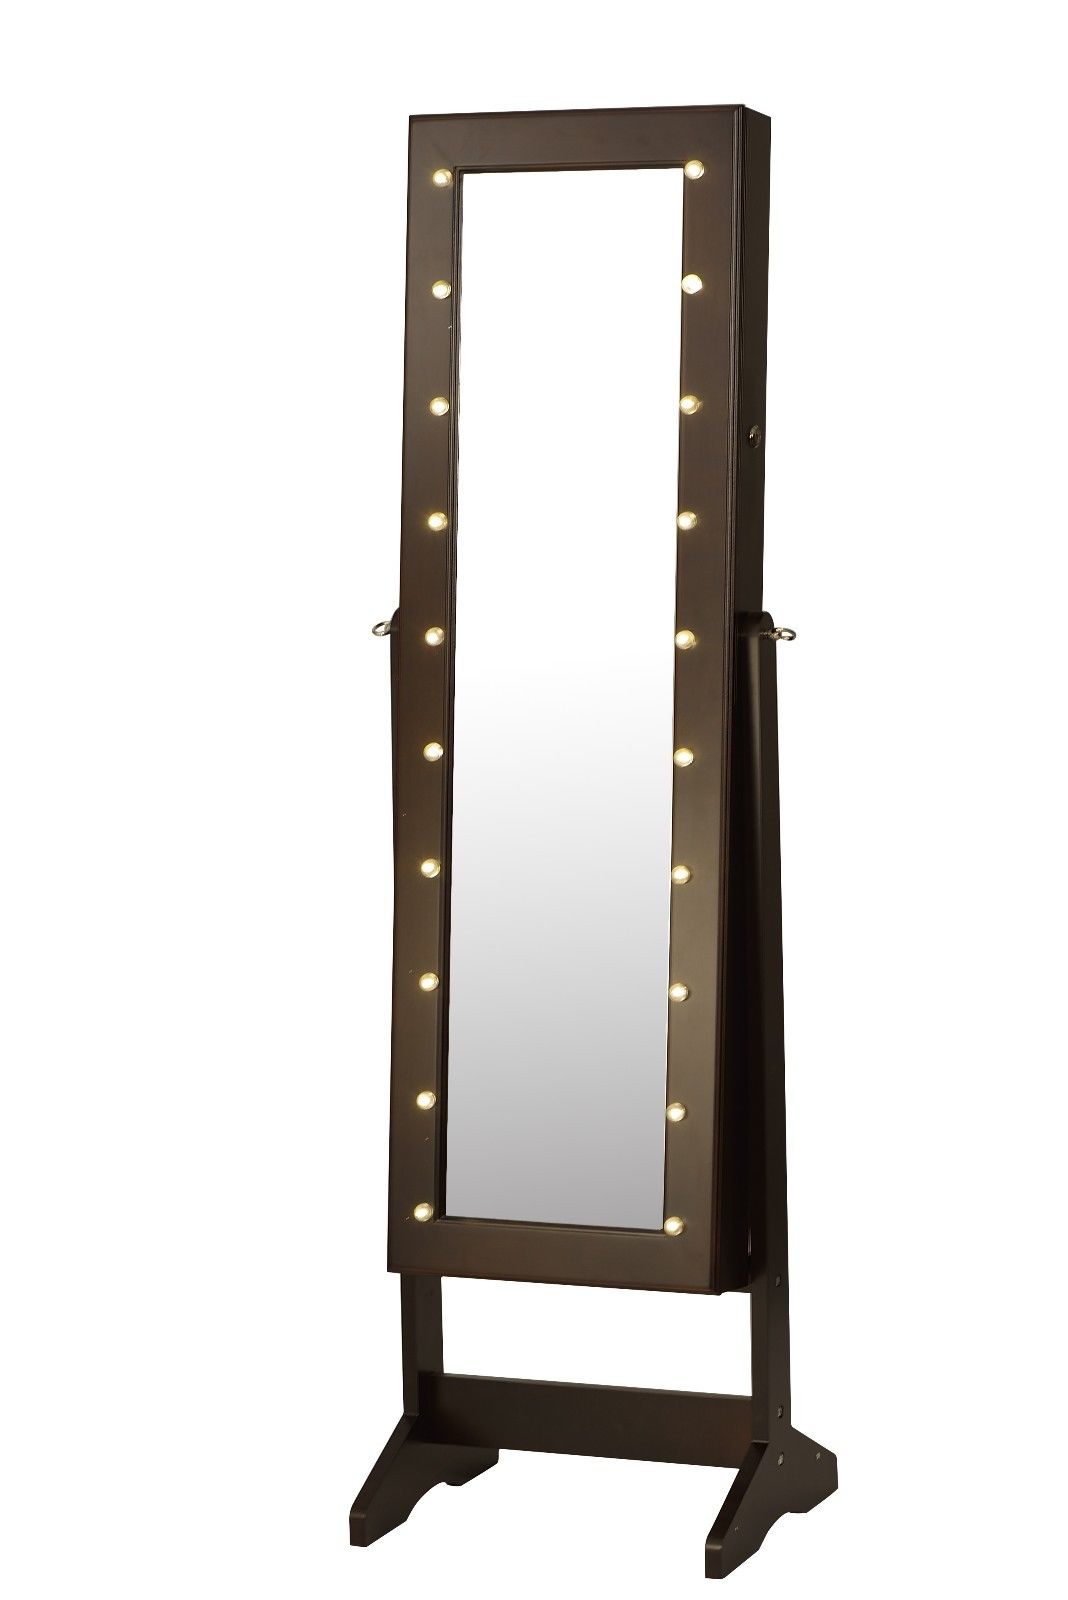 ViscoLogic Wooden Free Floor Standing Jewelry Organizer Mirrored Cabinet with LED lighting face